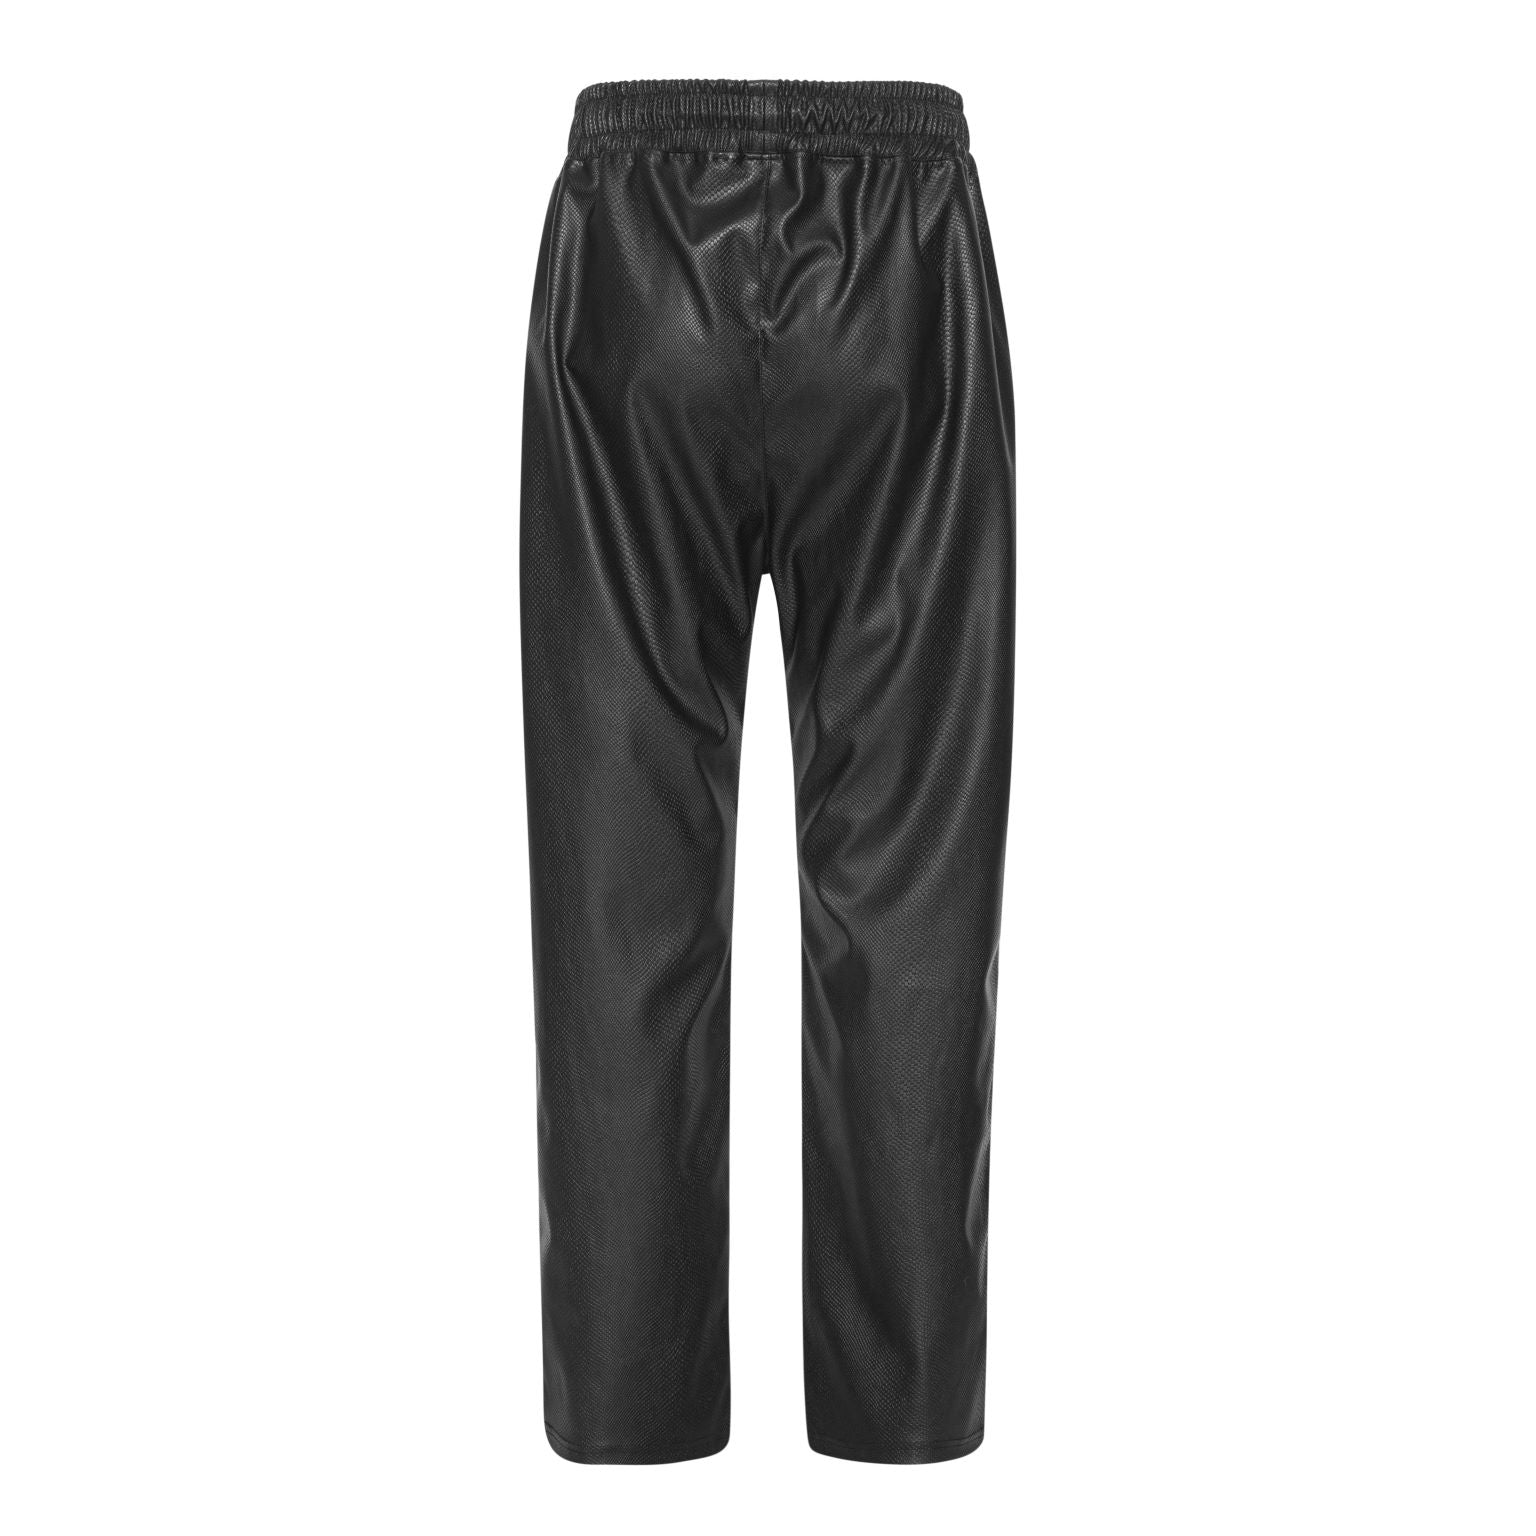 Black patterned imitation leather trousers